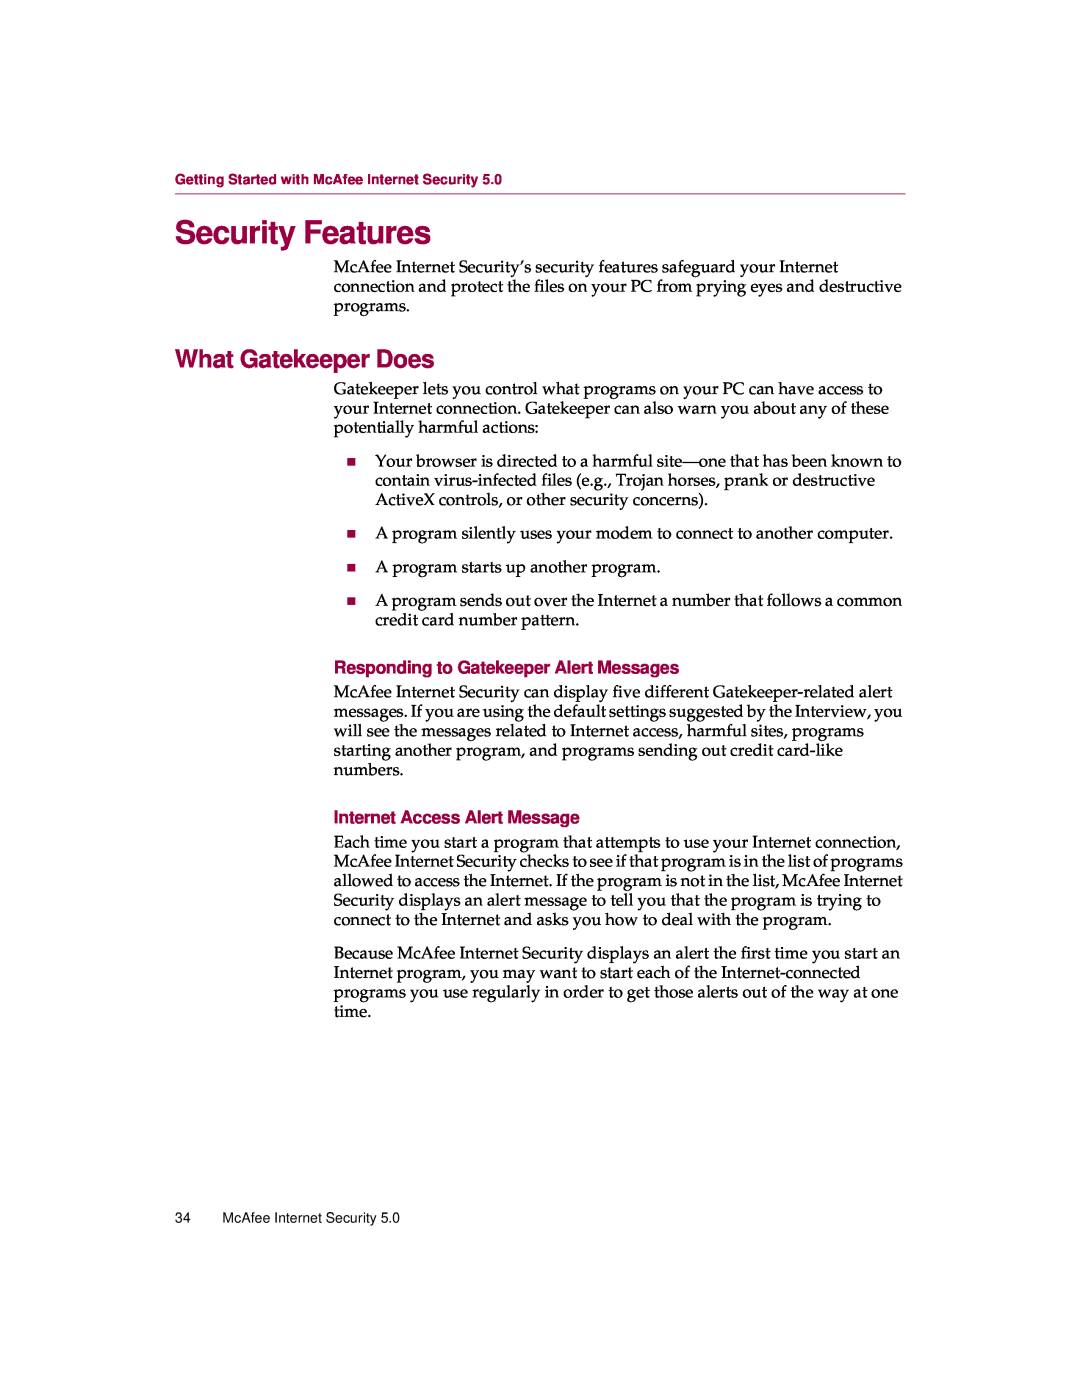 McAfee 5 Security Features, What Gatekeeper Does, Responding to Gatekeeper Alert Messages, Internet Access Alert Message 